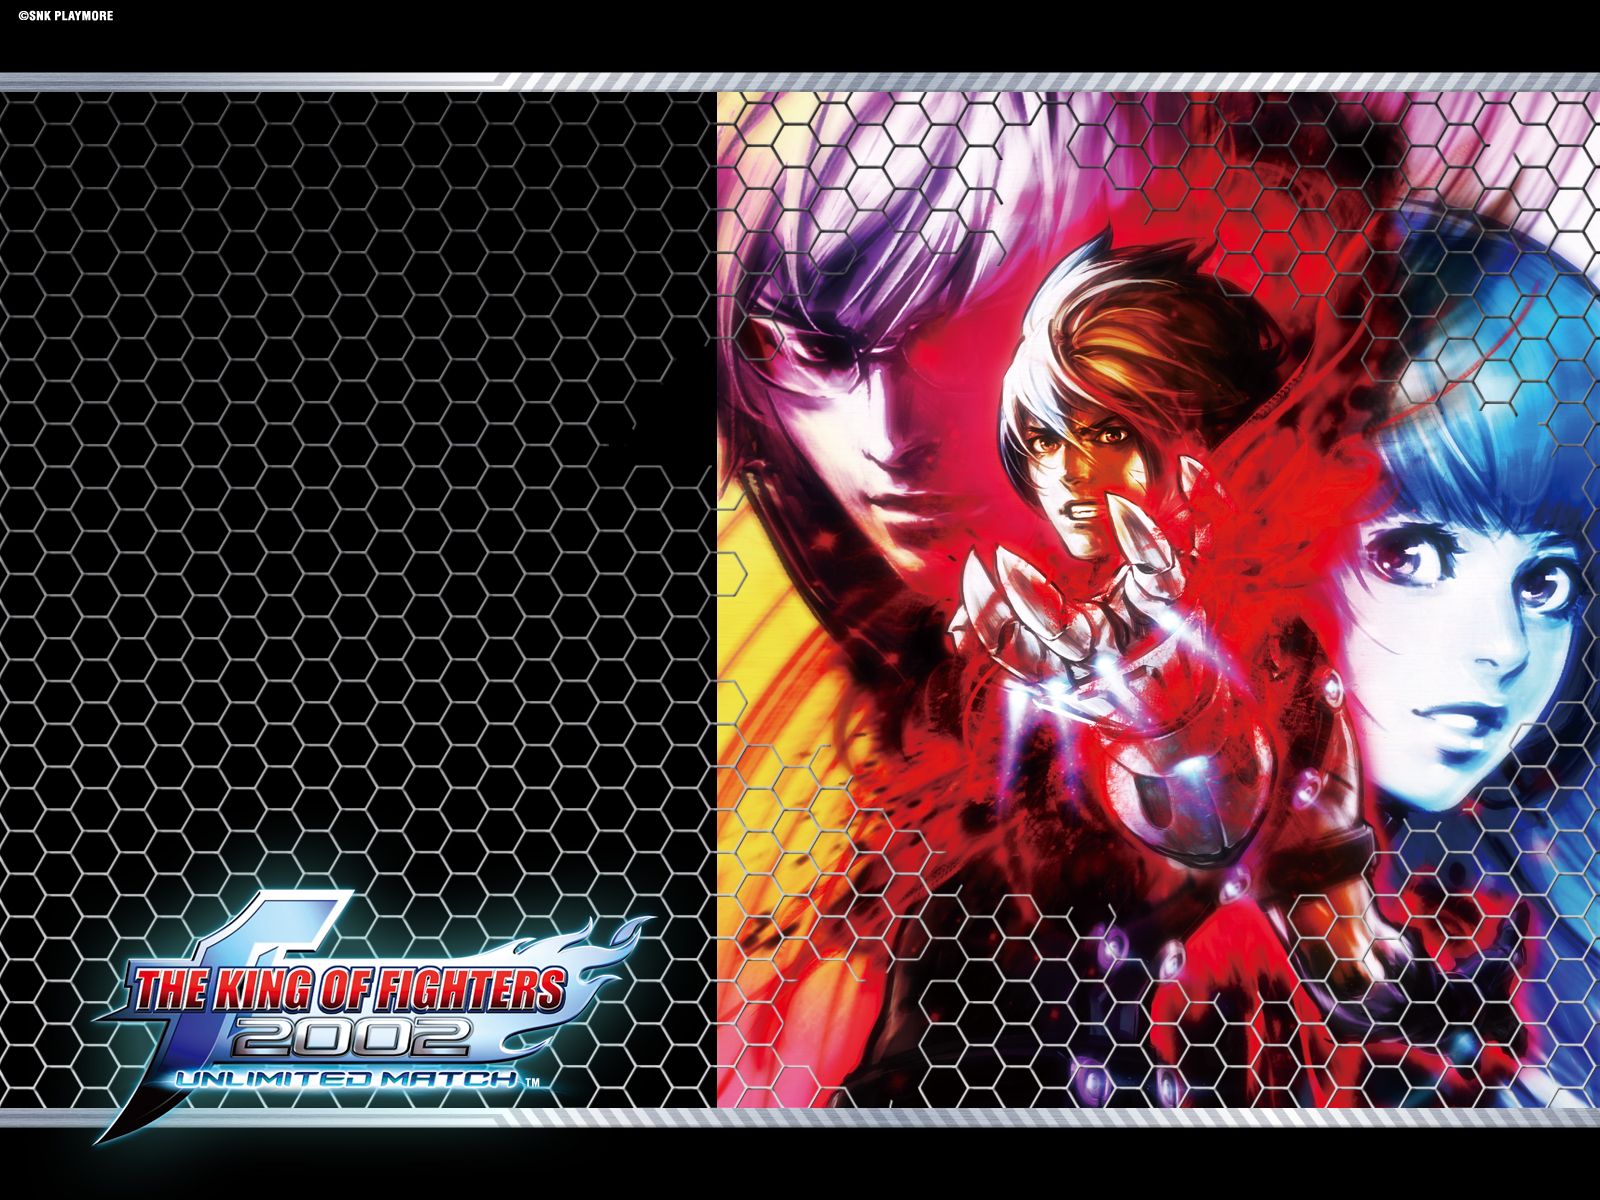 The King of Fighters Wallpaper Anime Image Board